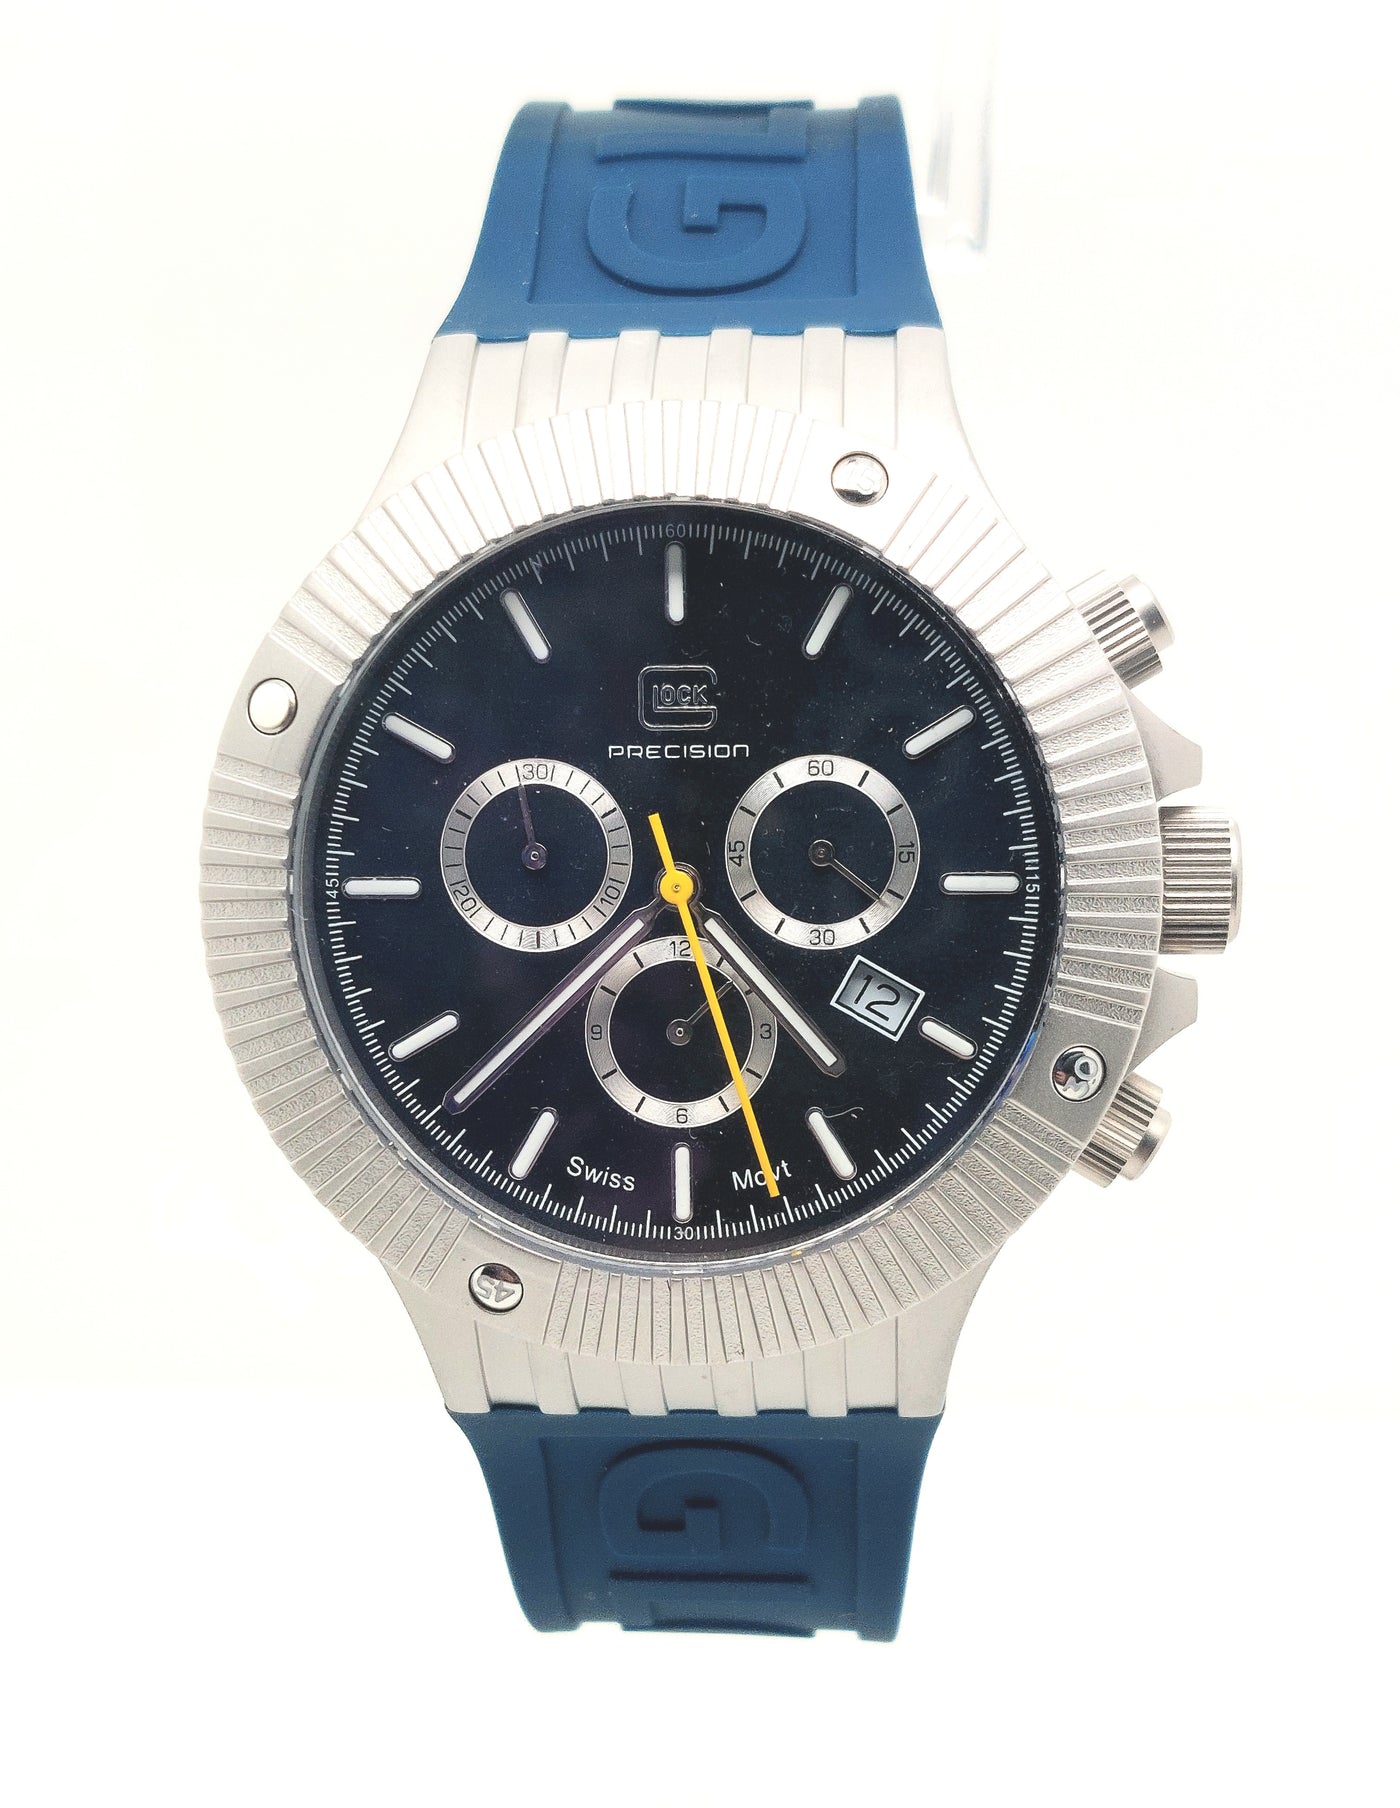 Gents Steel Glock Watch with Blue Dial and Chronodial